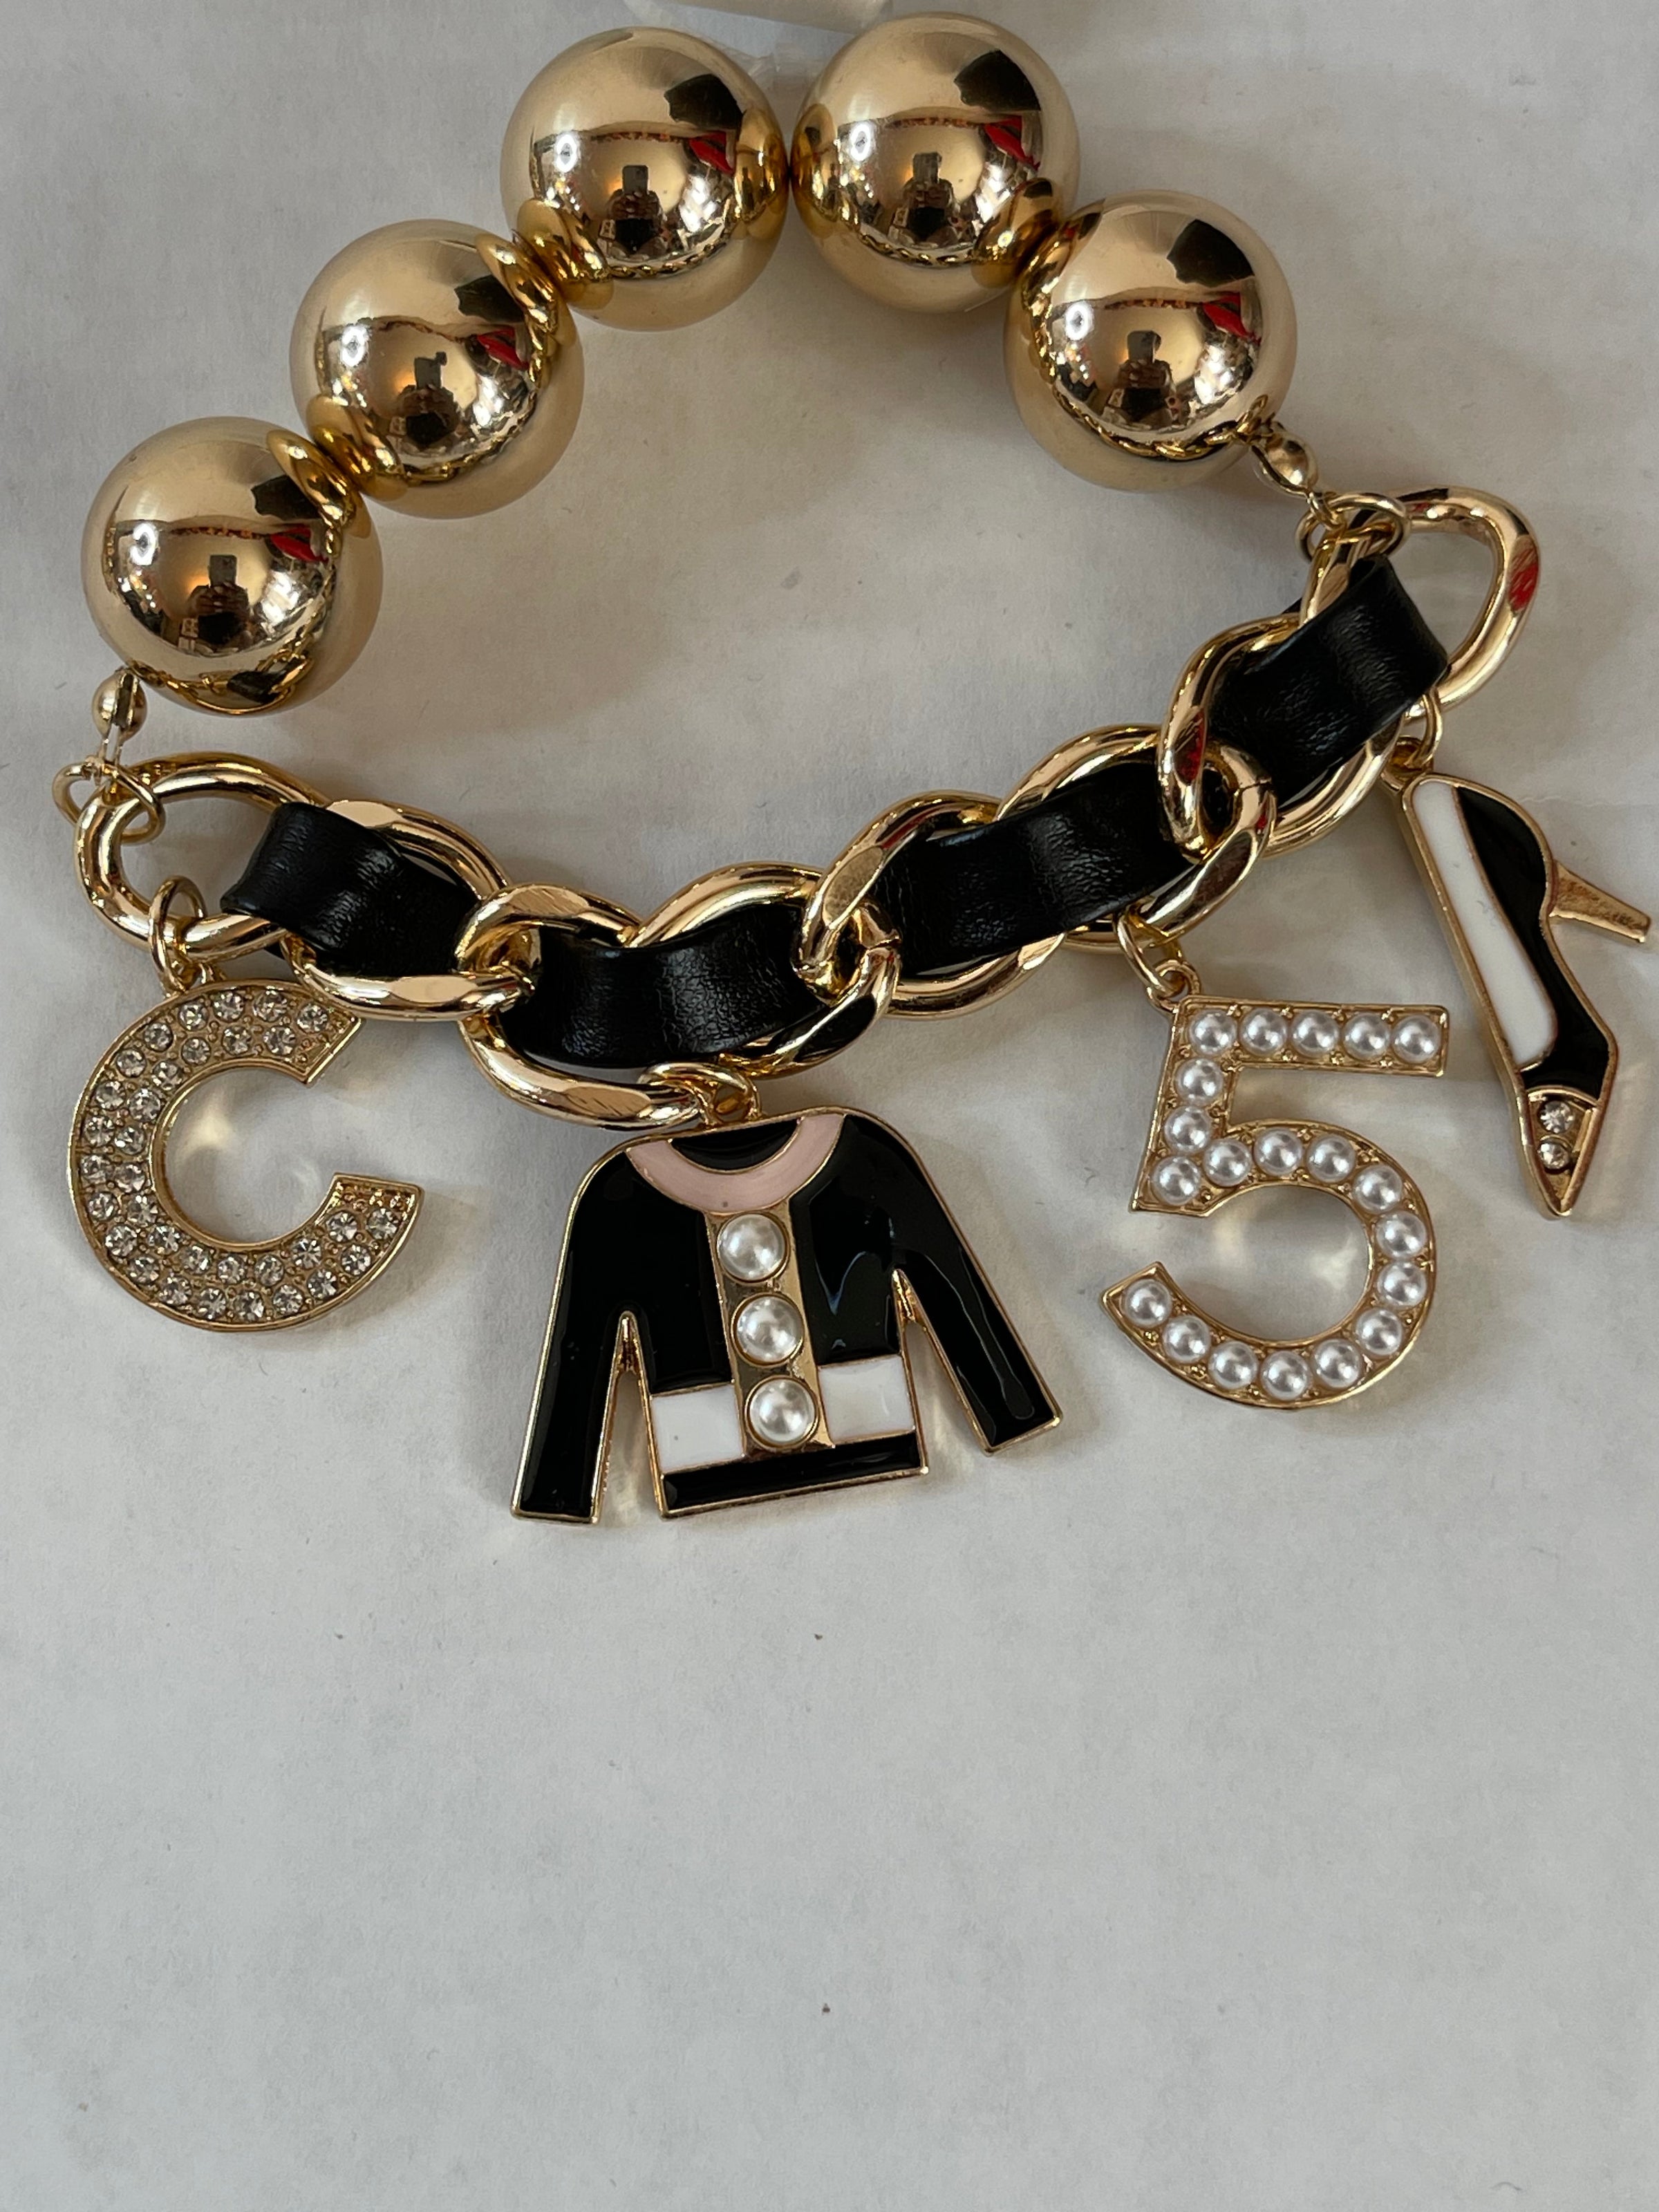 Chanel Charms for Bracelet 